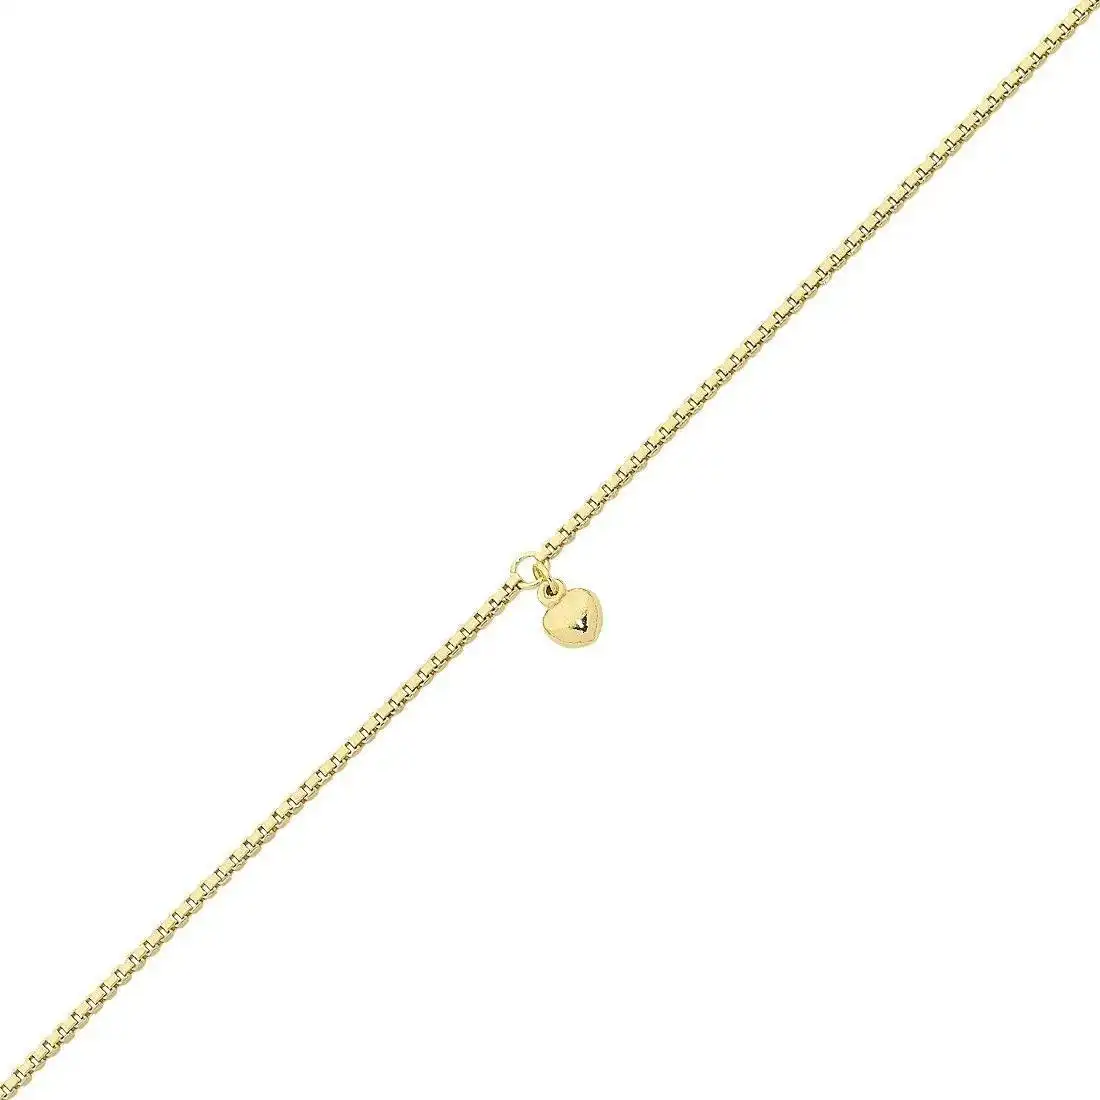 9ct Yellow Gold Silver Infused Anklet with Puff Heart